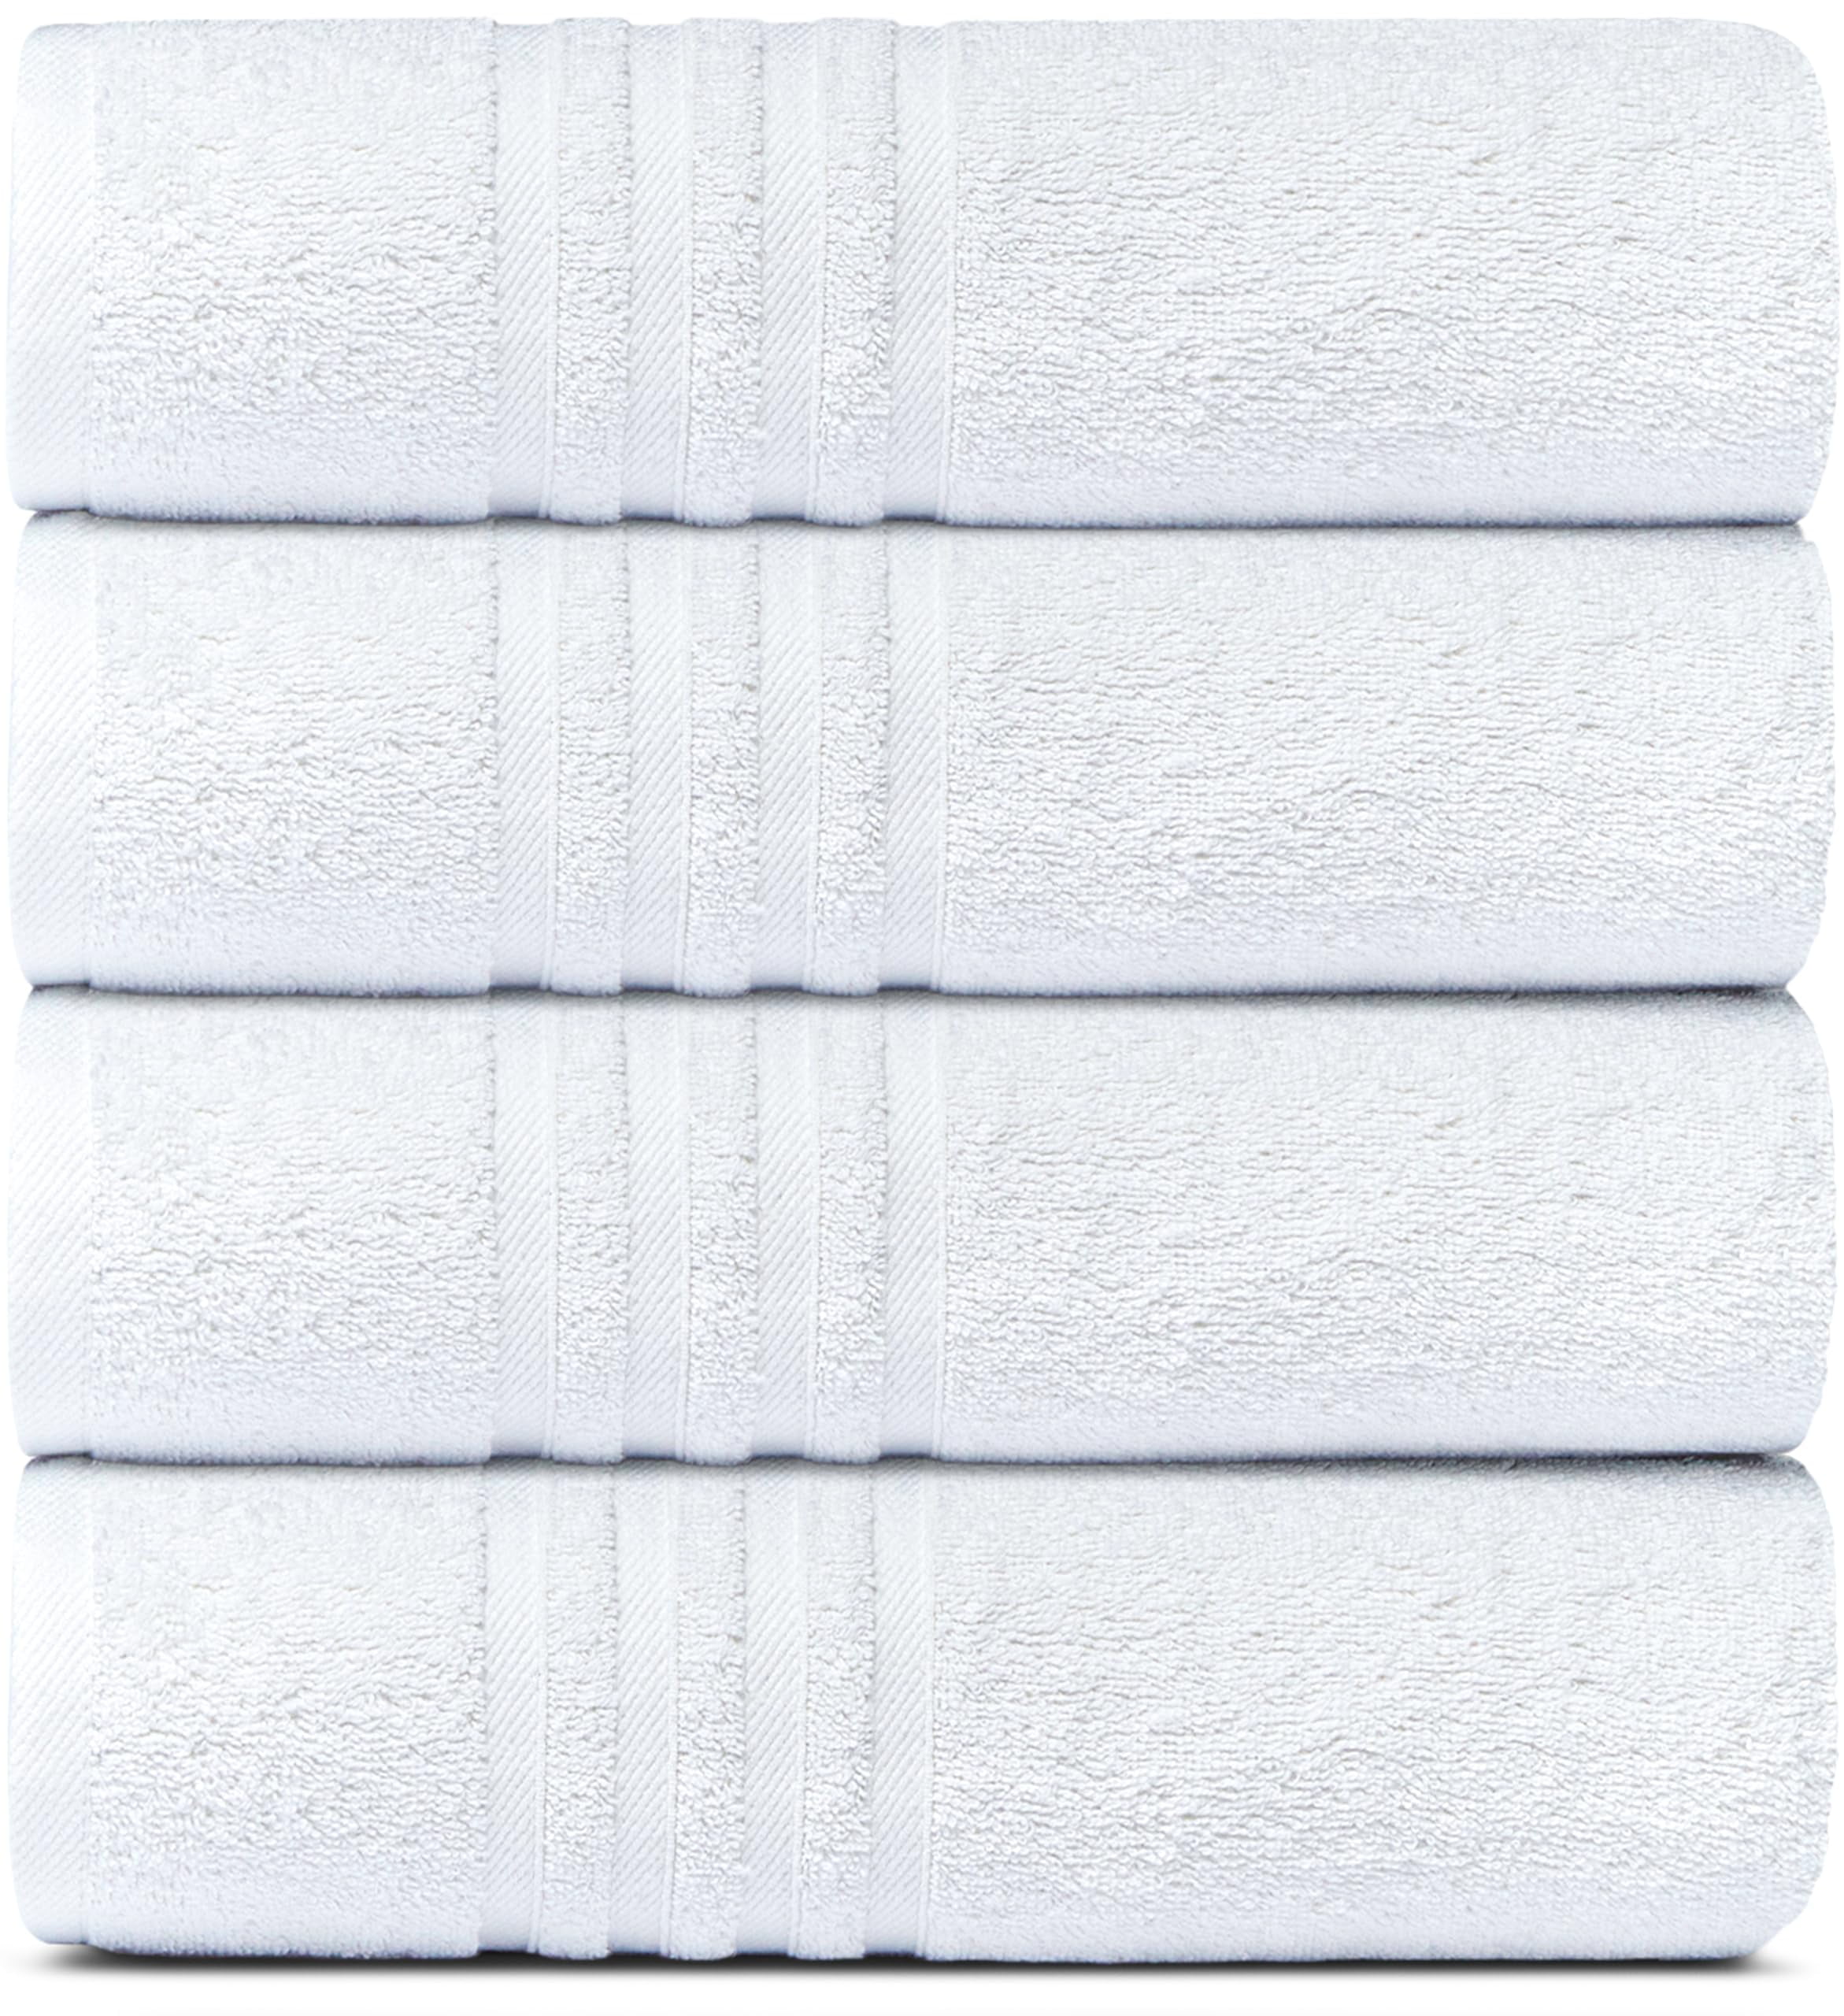 Wealuxe White Hand Towels for Bathroom [12 Pack] Cotton Hand Towel Bulk for  Gym, Kitchen and Spa, 16x27 Inches Soft Highly Absorbent Quick Dry Terry